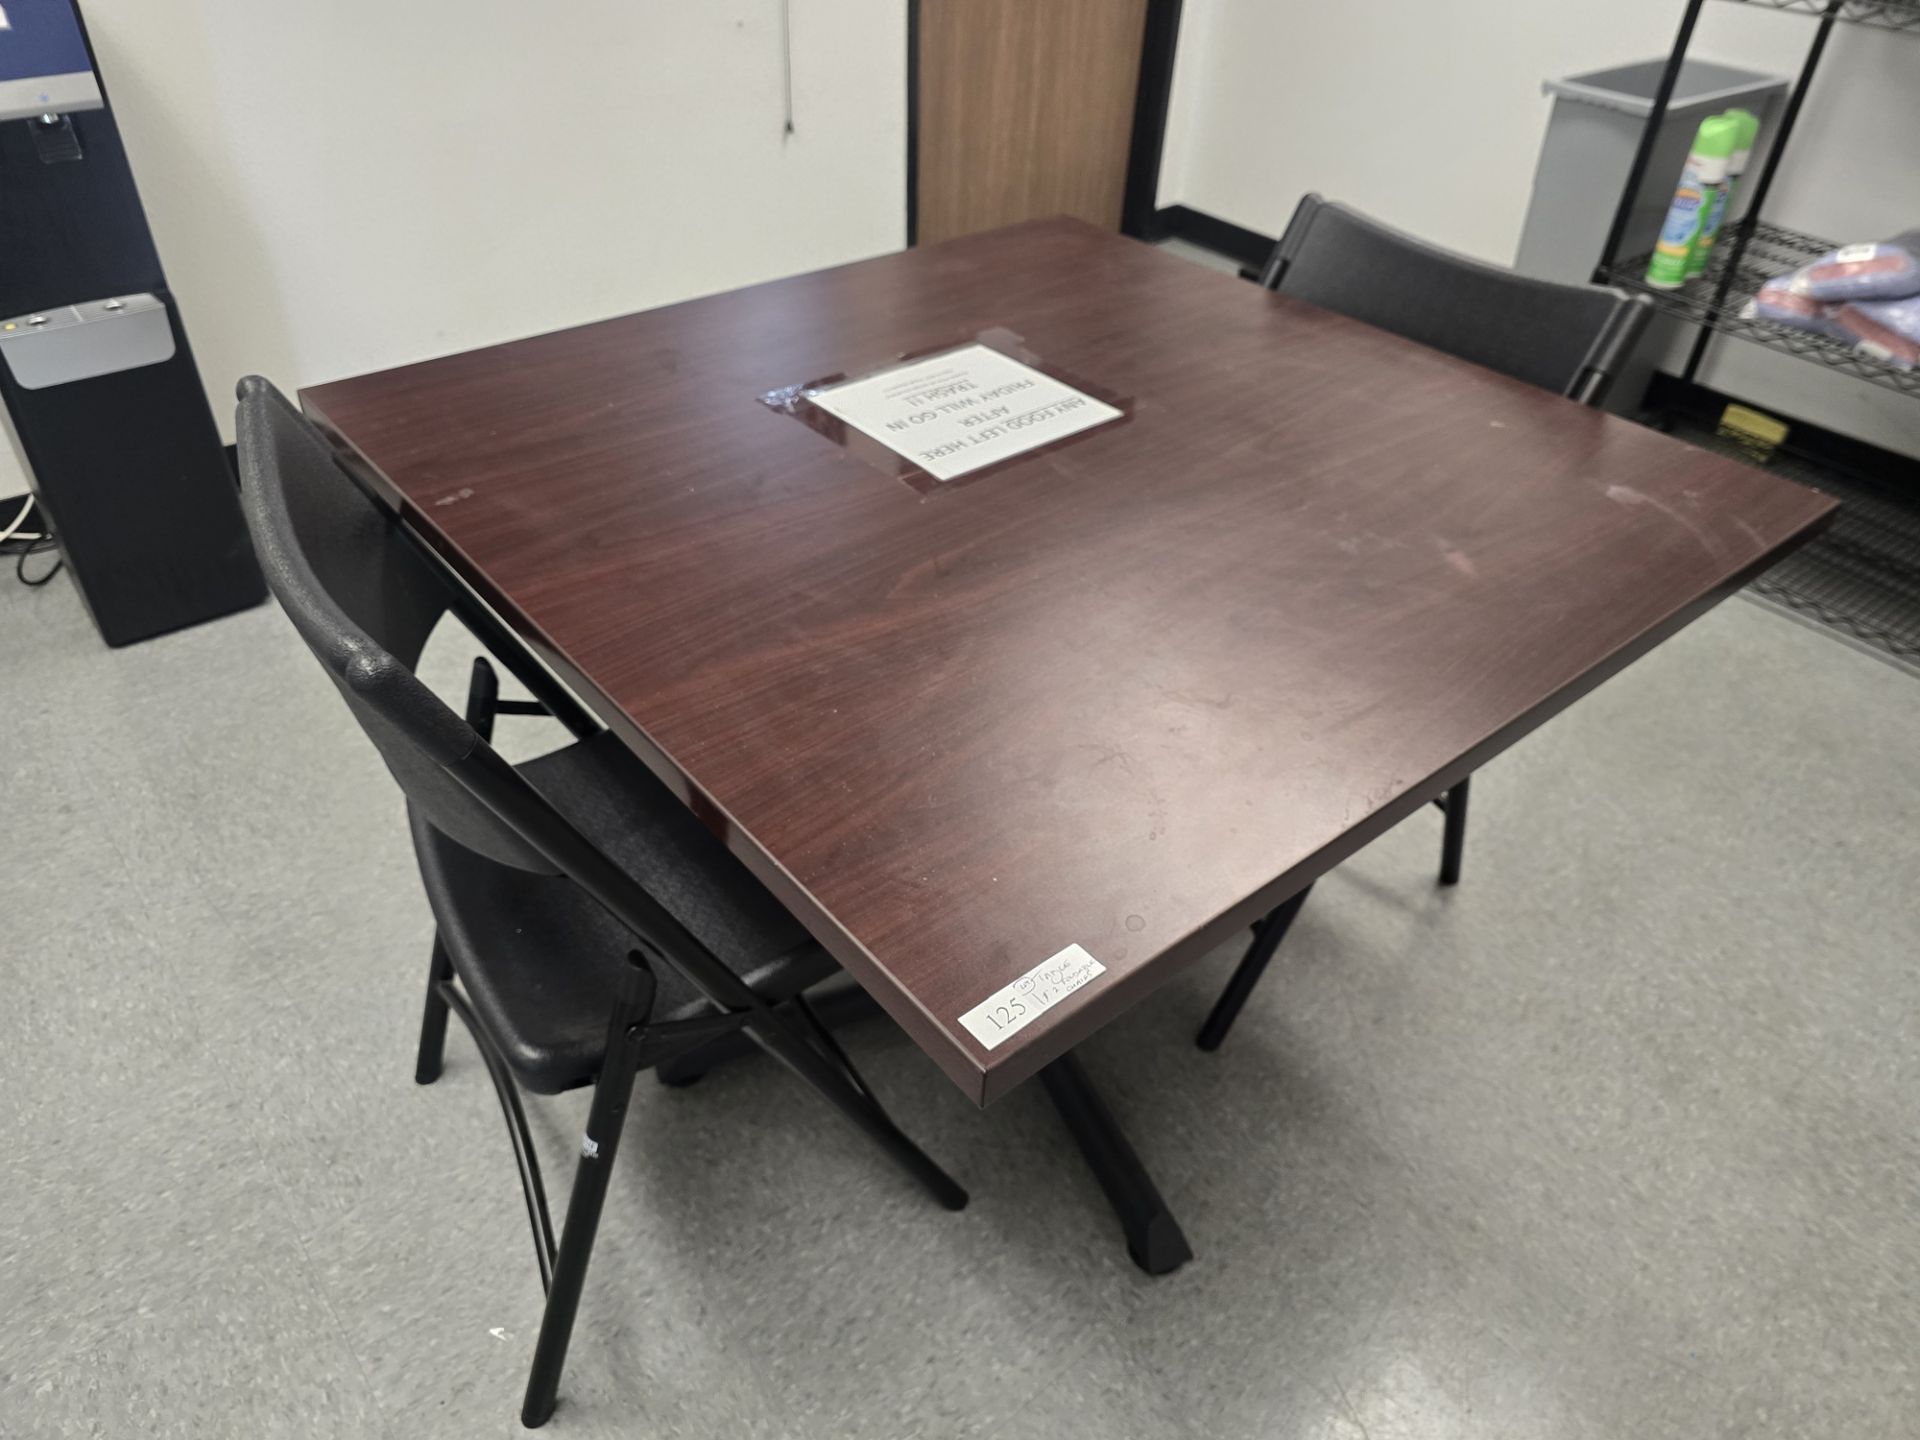 TABLE W/ 2 FOLDABLE CHAIRS